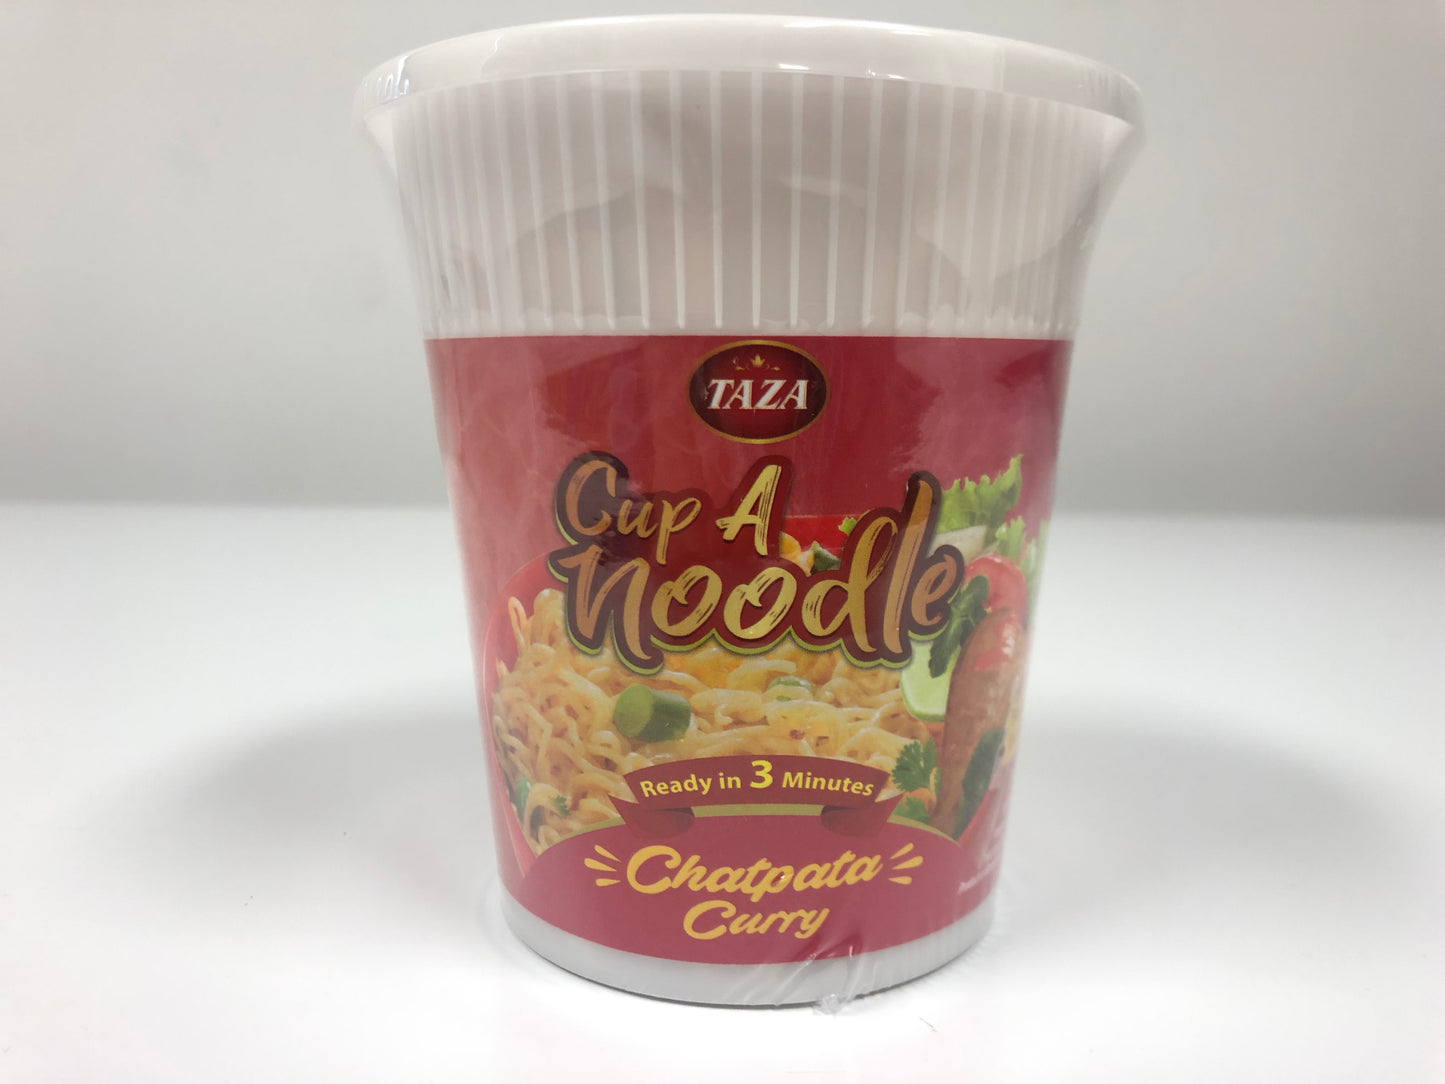 Taza Chatpata Curry Cup A Noodles